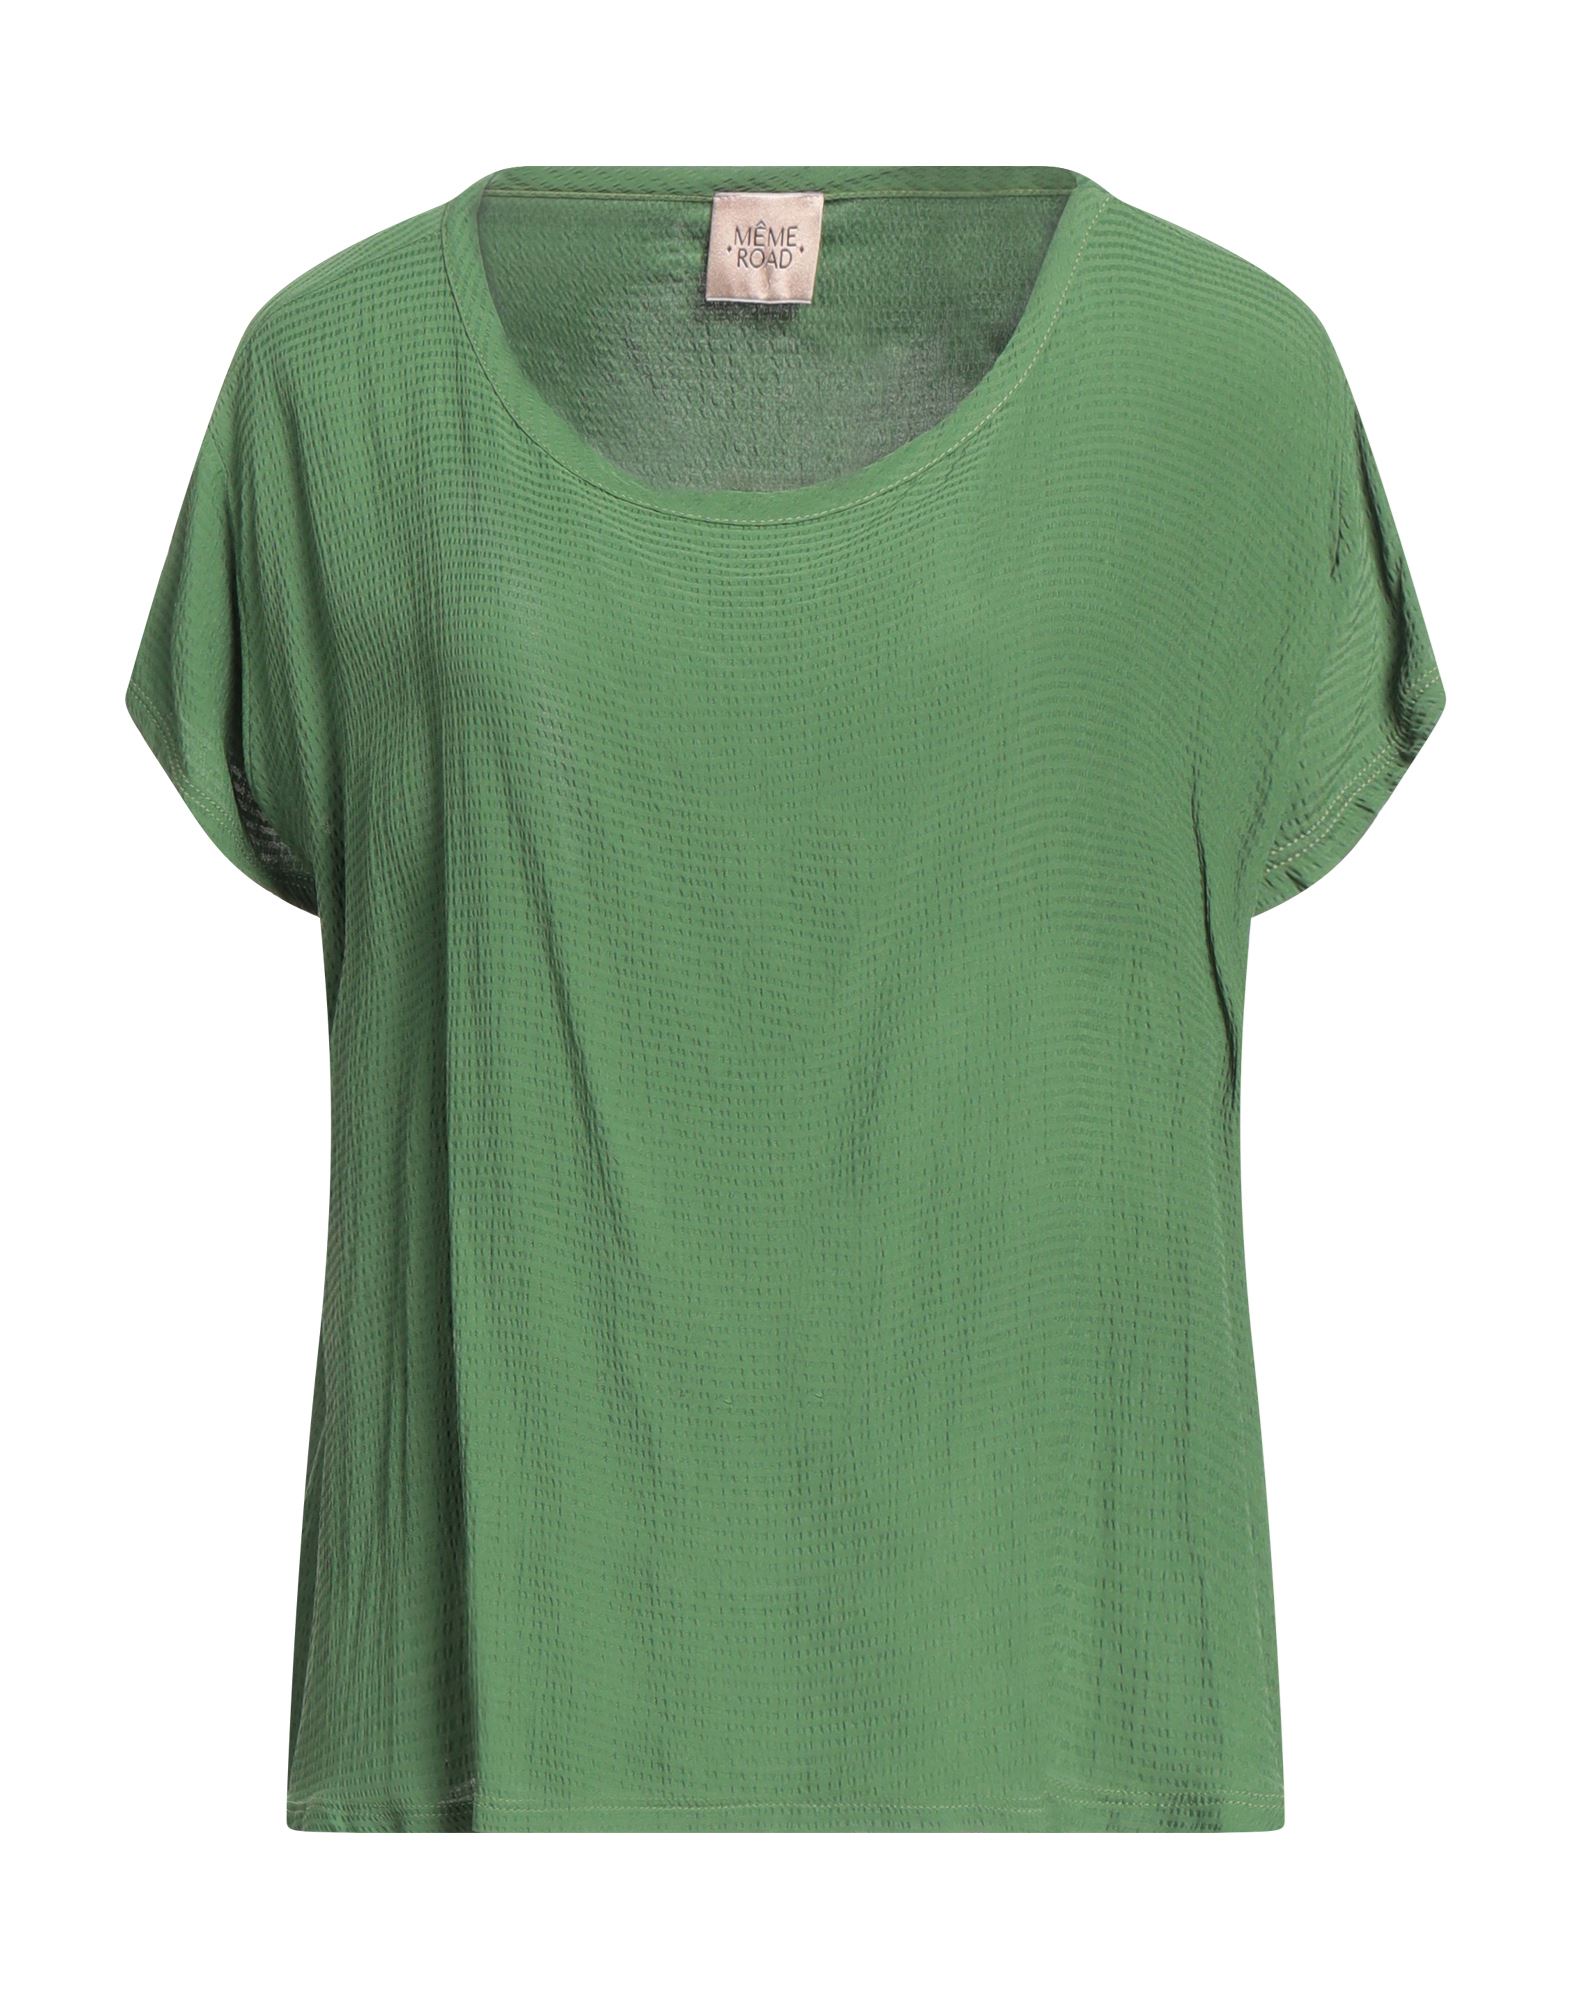 Même Road Blouses In Green